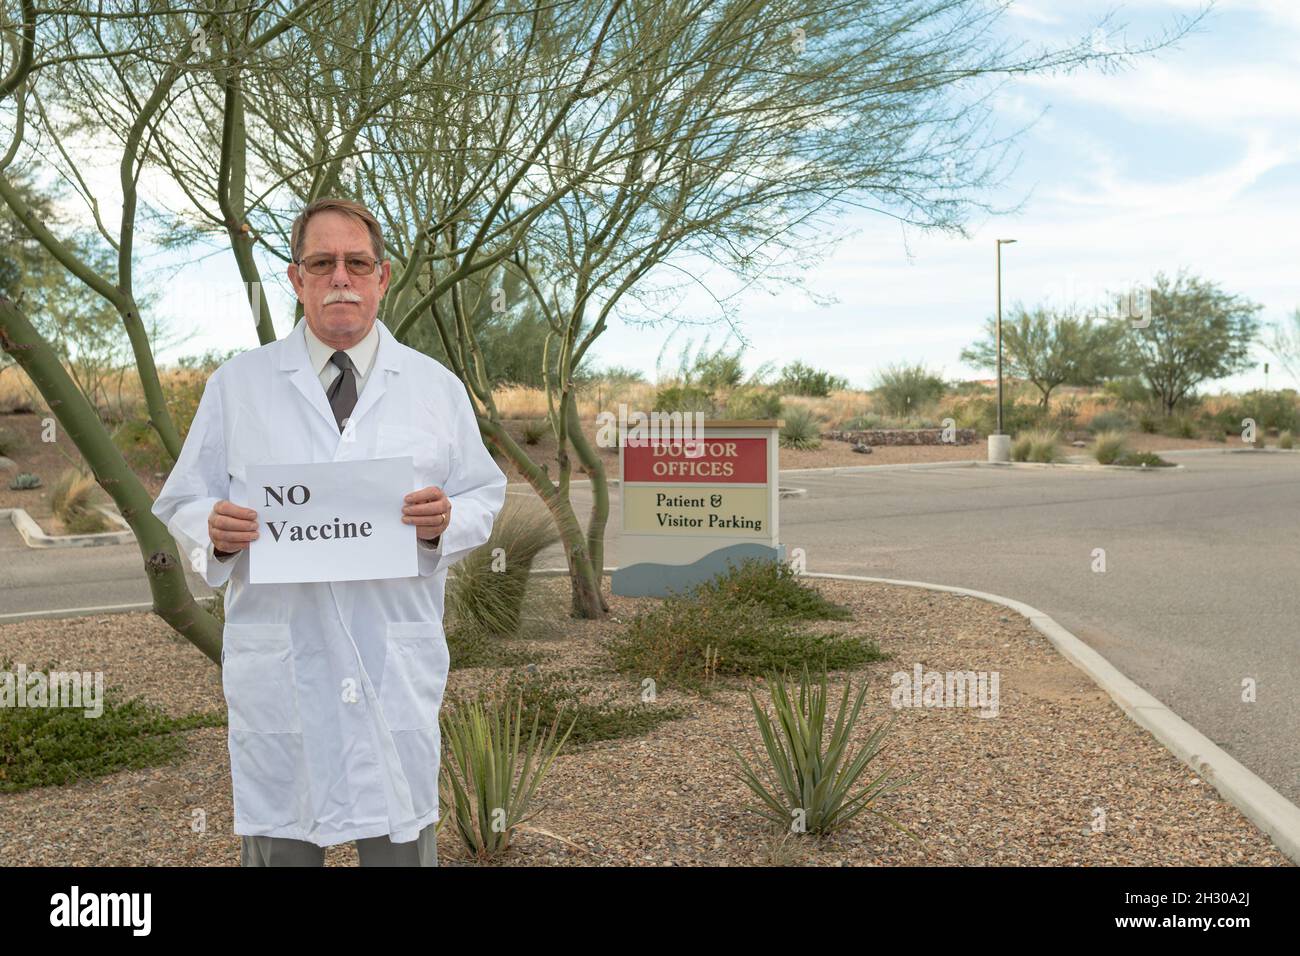 Doctor holds No Vaccine sign in opposition to the mandate in Arizona and United States Stock Photo